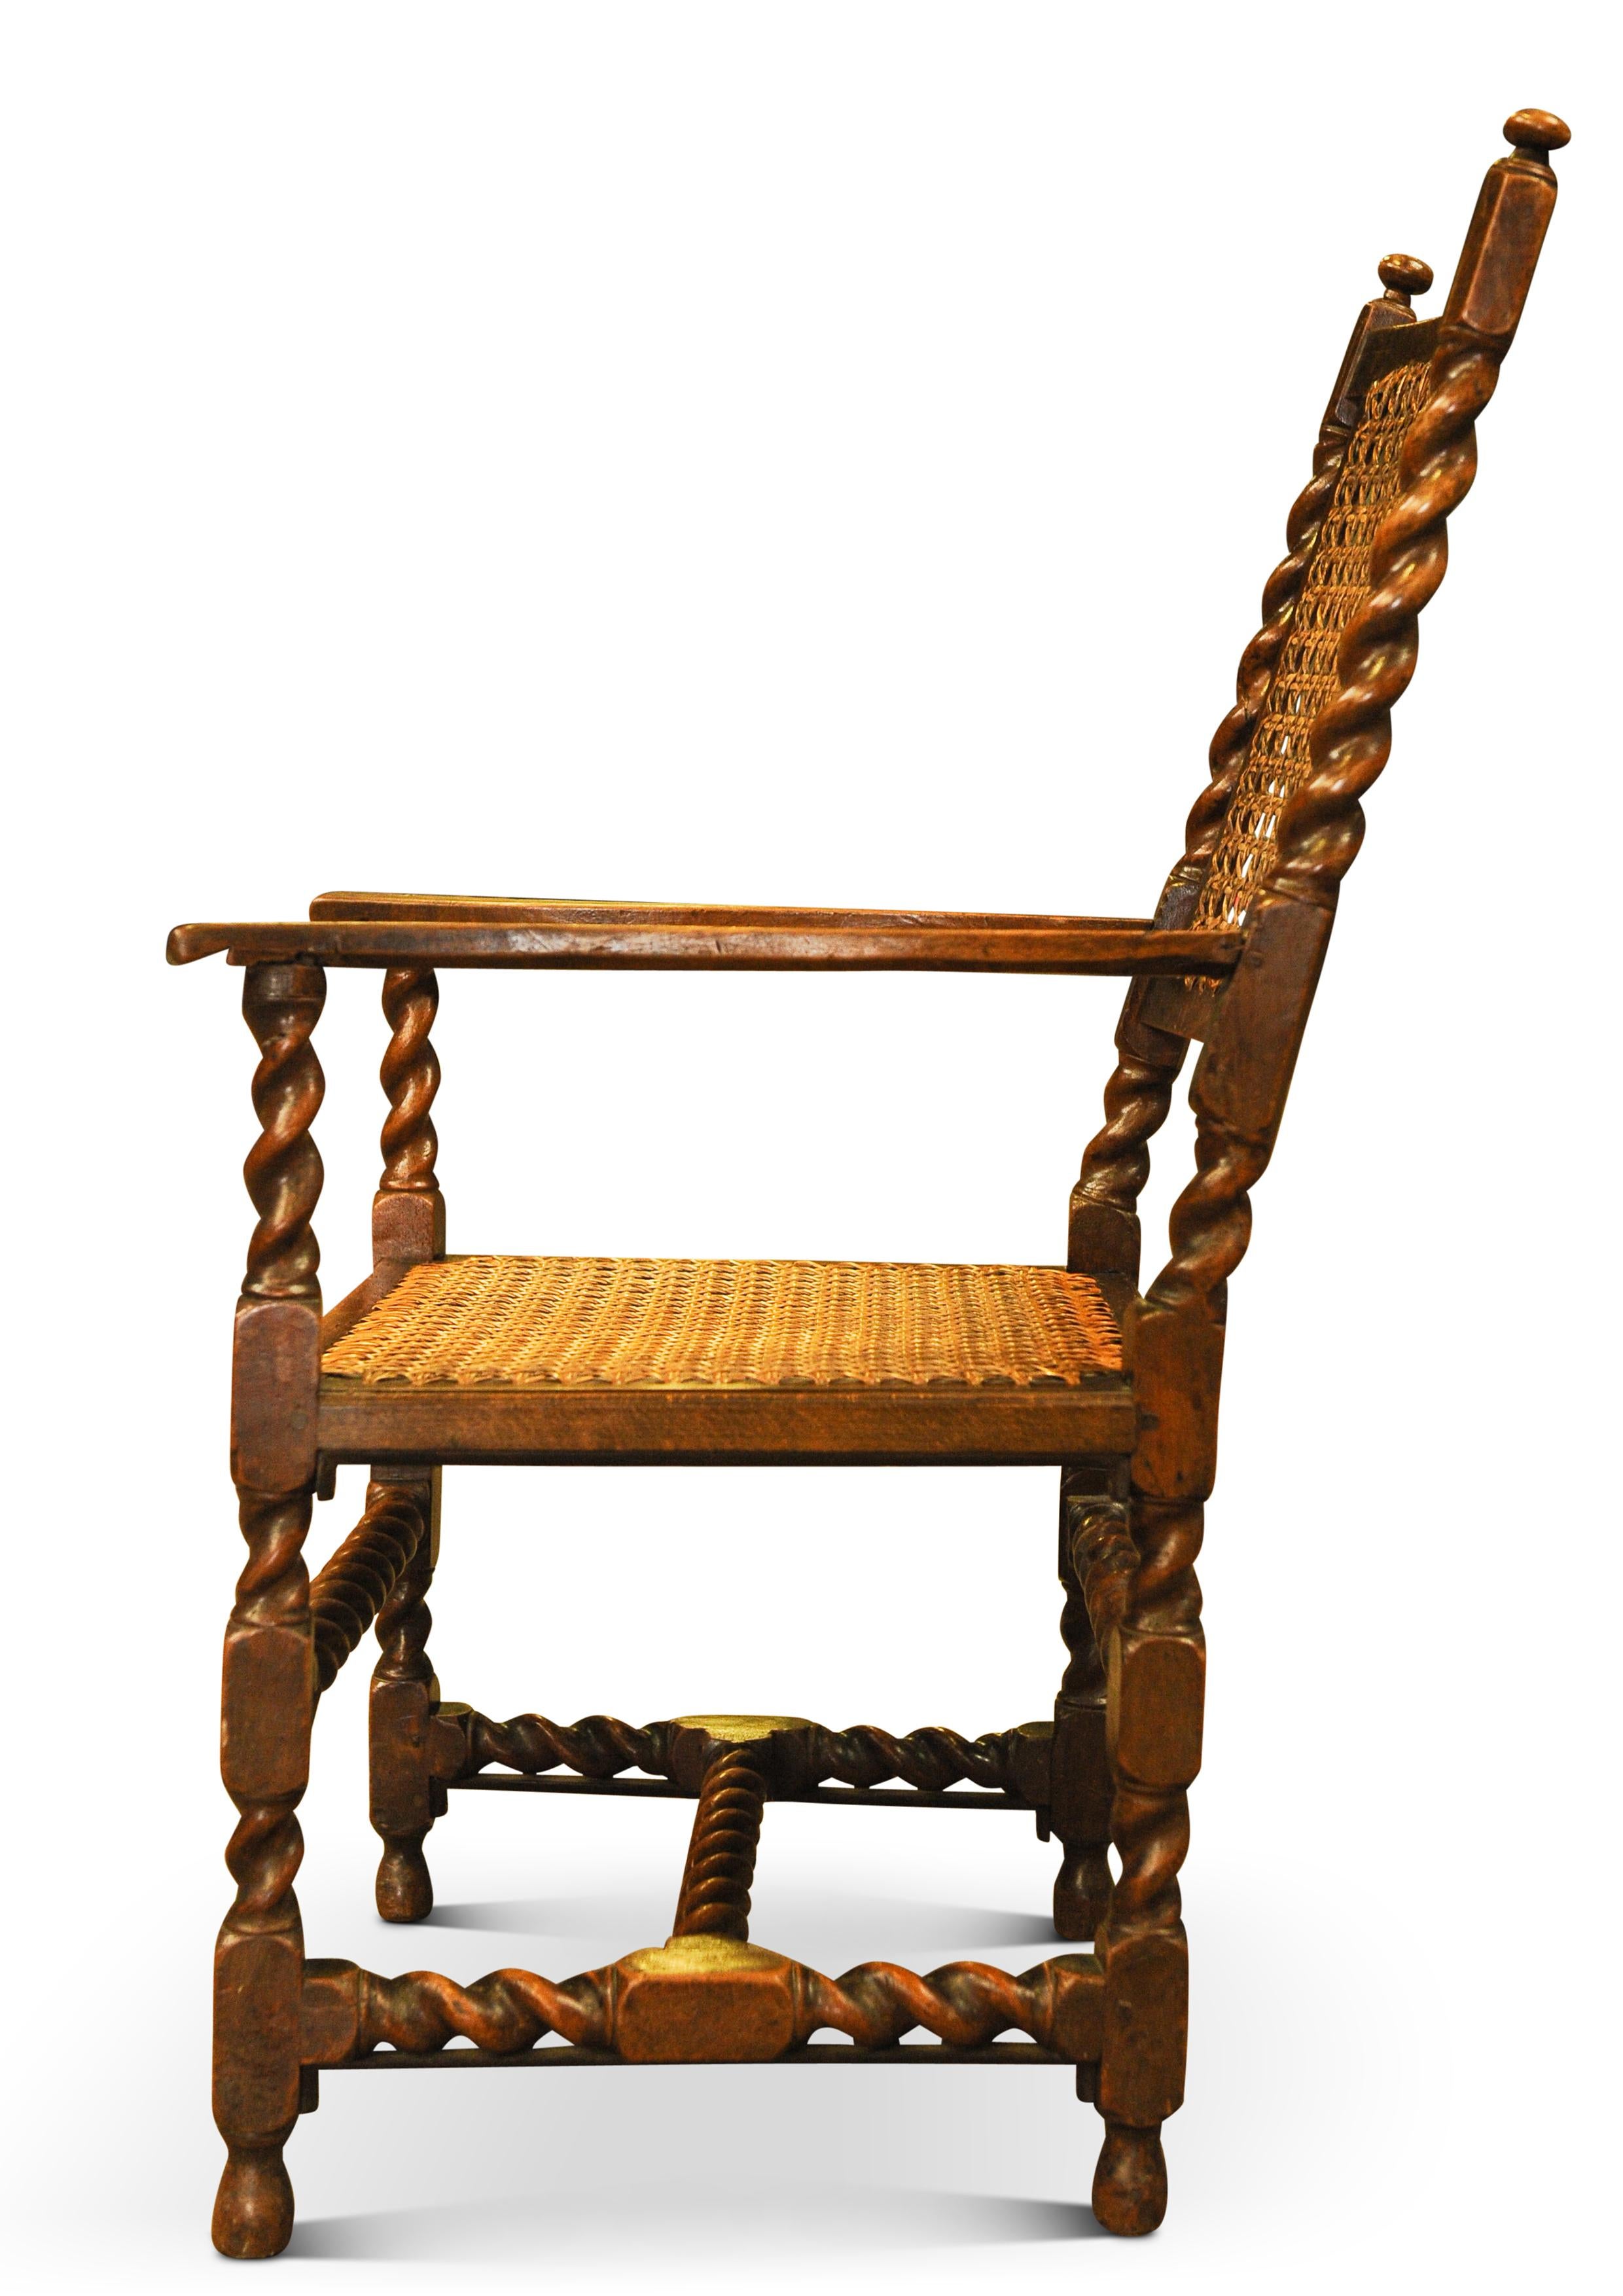 Aesthetic Movement Antique Walnut Barley Twist Library Armchair with Cane Seat & Rear 1850s For Sale